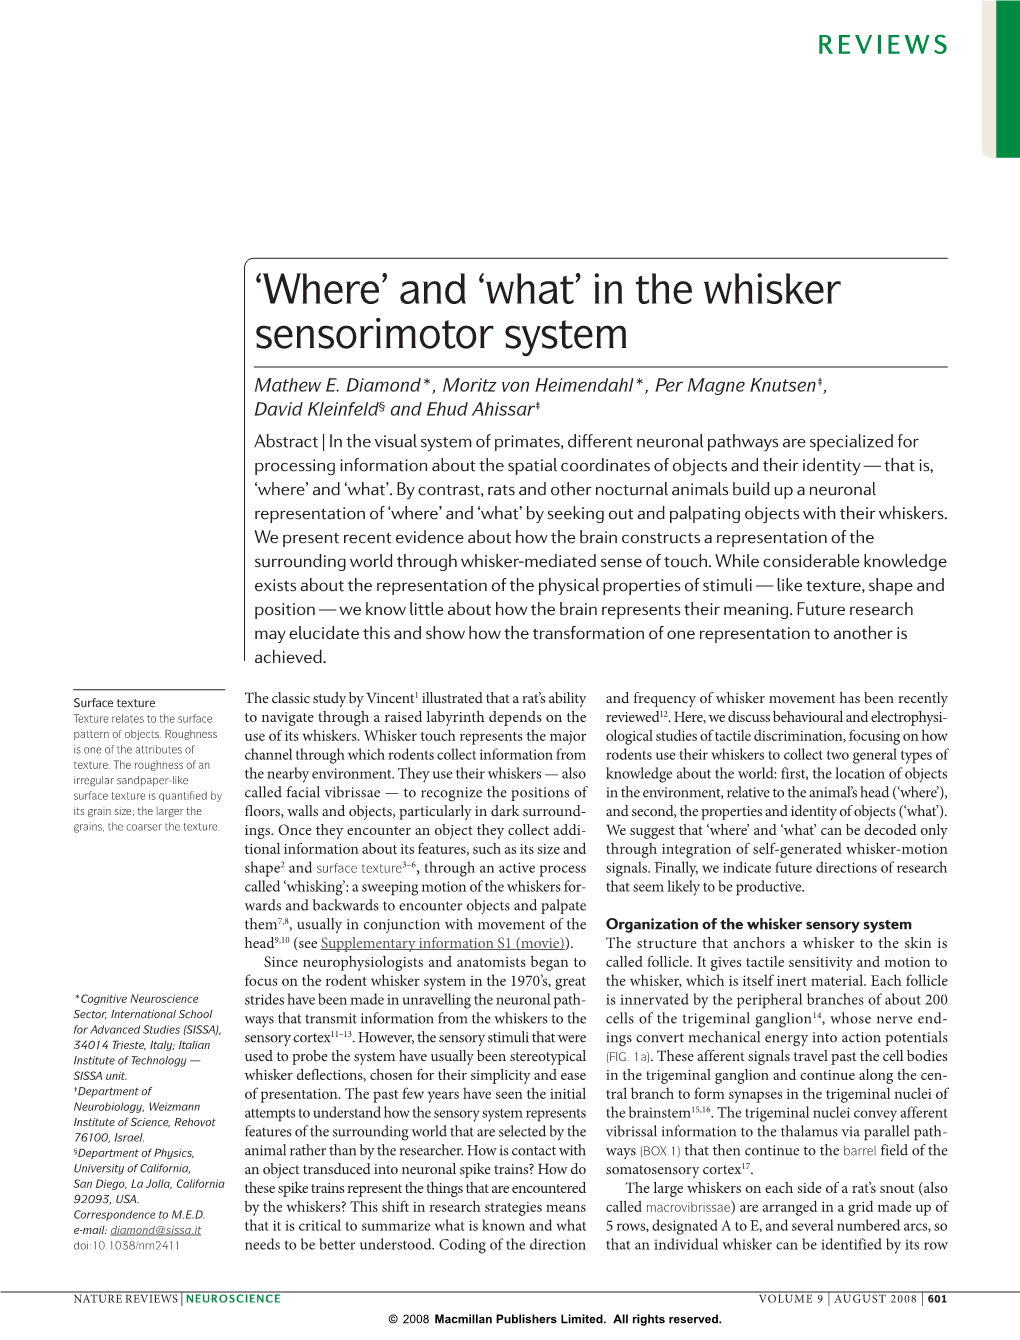 'Where' and 'What' in the Whisker Sensorimotor System